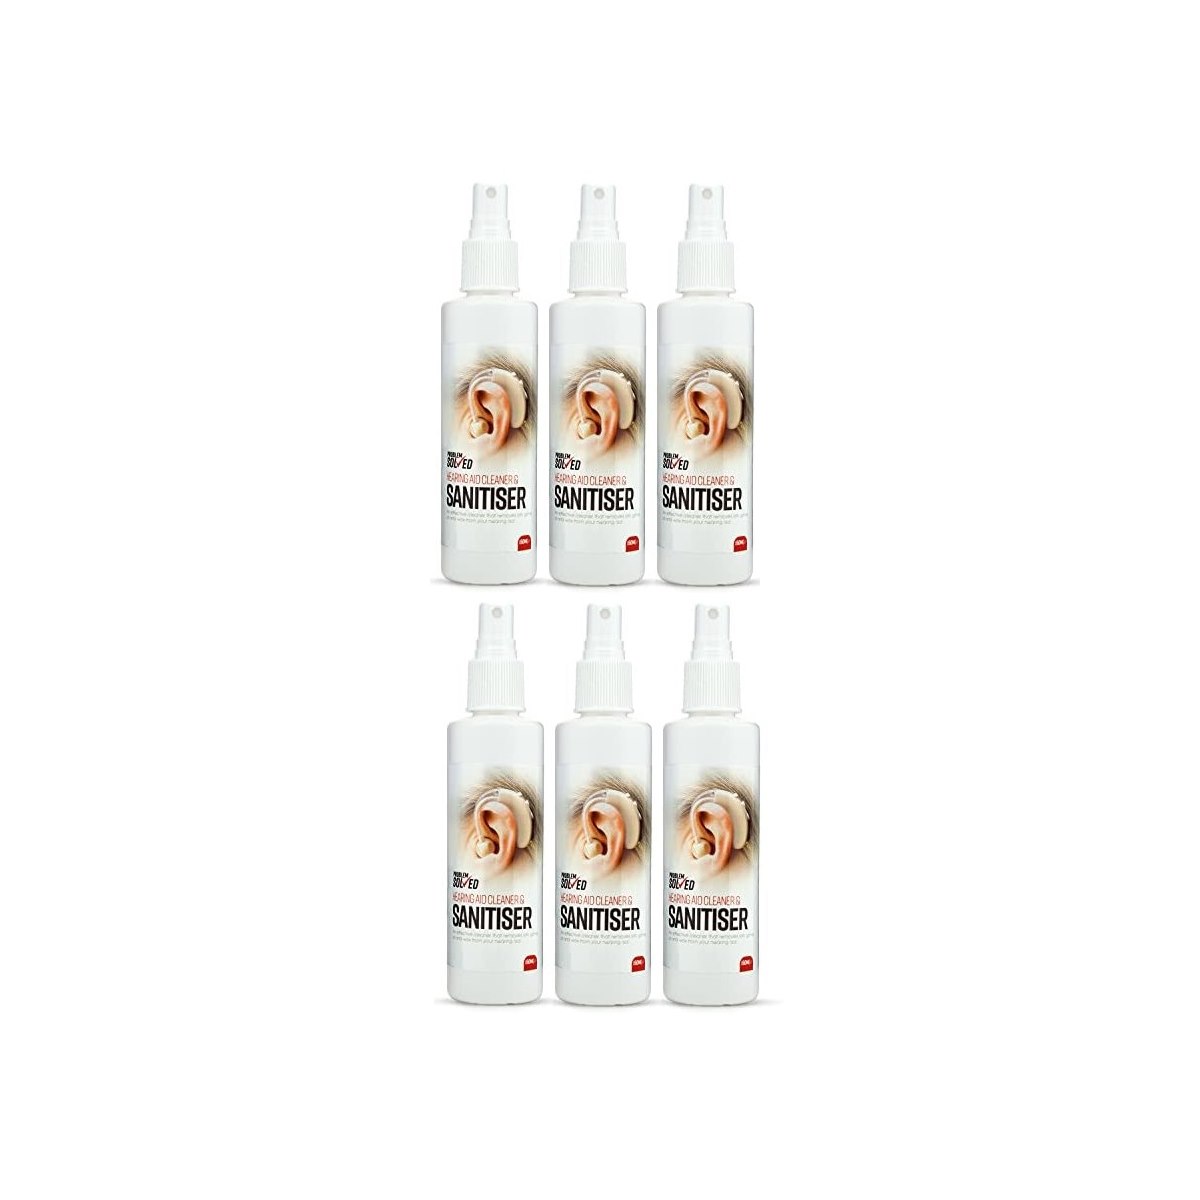 Case of 6 x Problem Solved Hearing Aid Cleaner and Sanitiser Spray 150ml